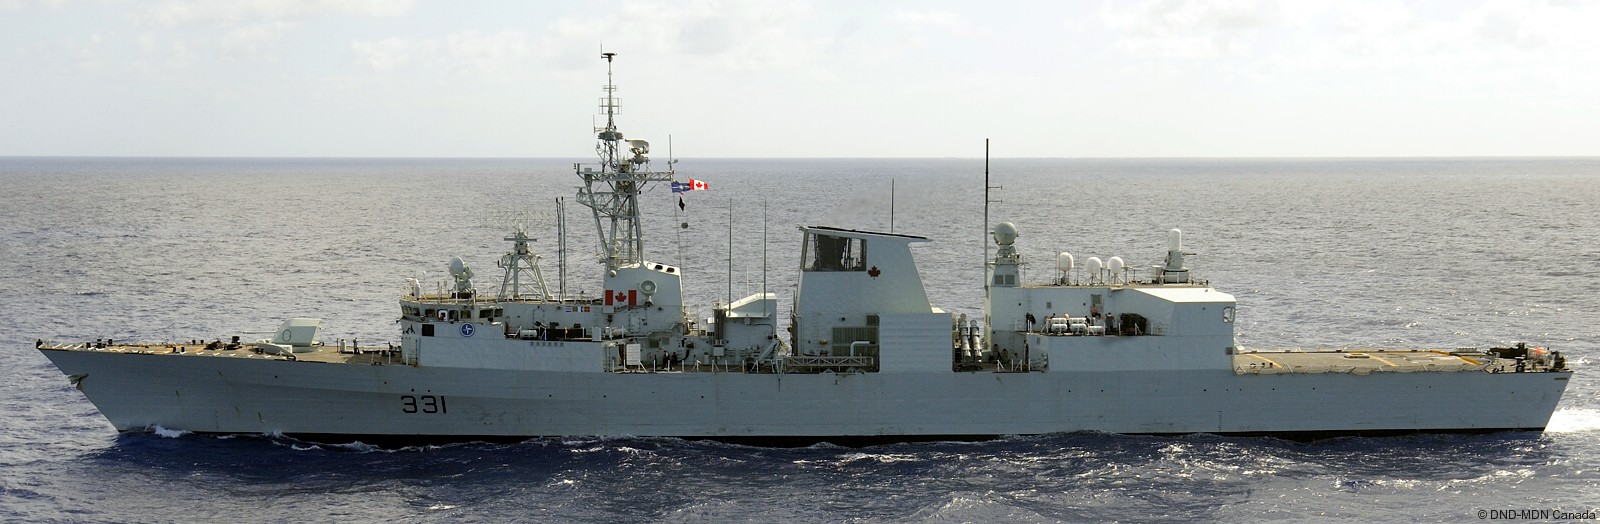 ffh-331 hmcs vancouver halifax class helicopter patrol frigate ncsm royal canadian navy 38